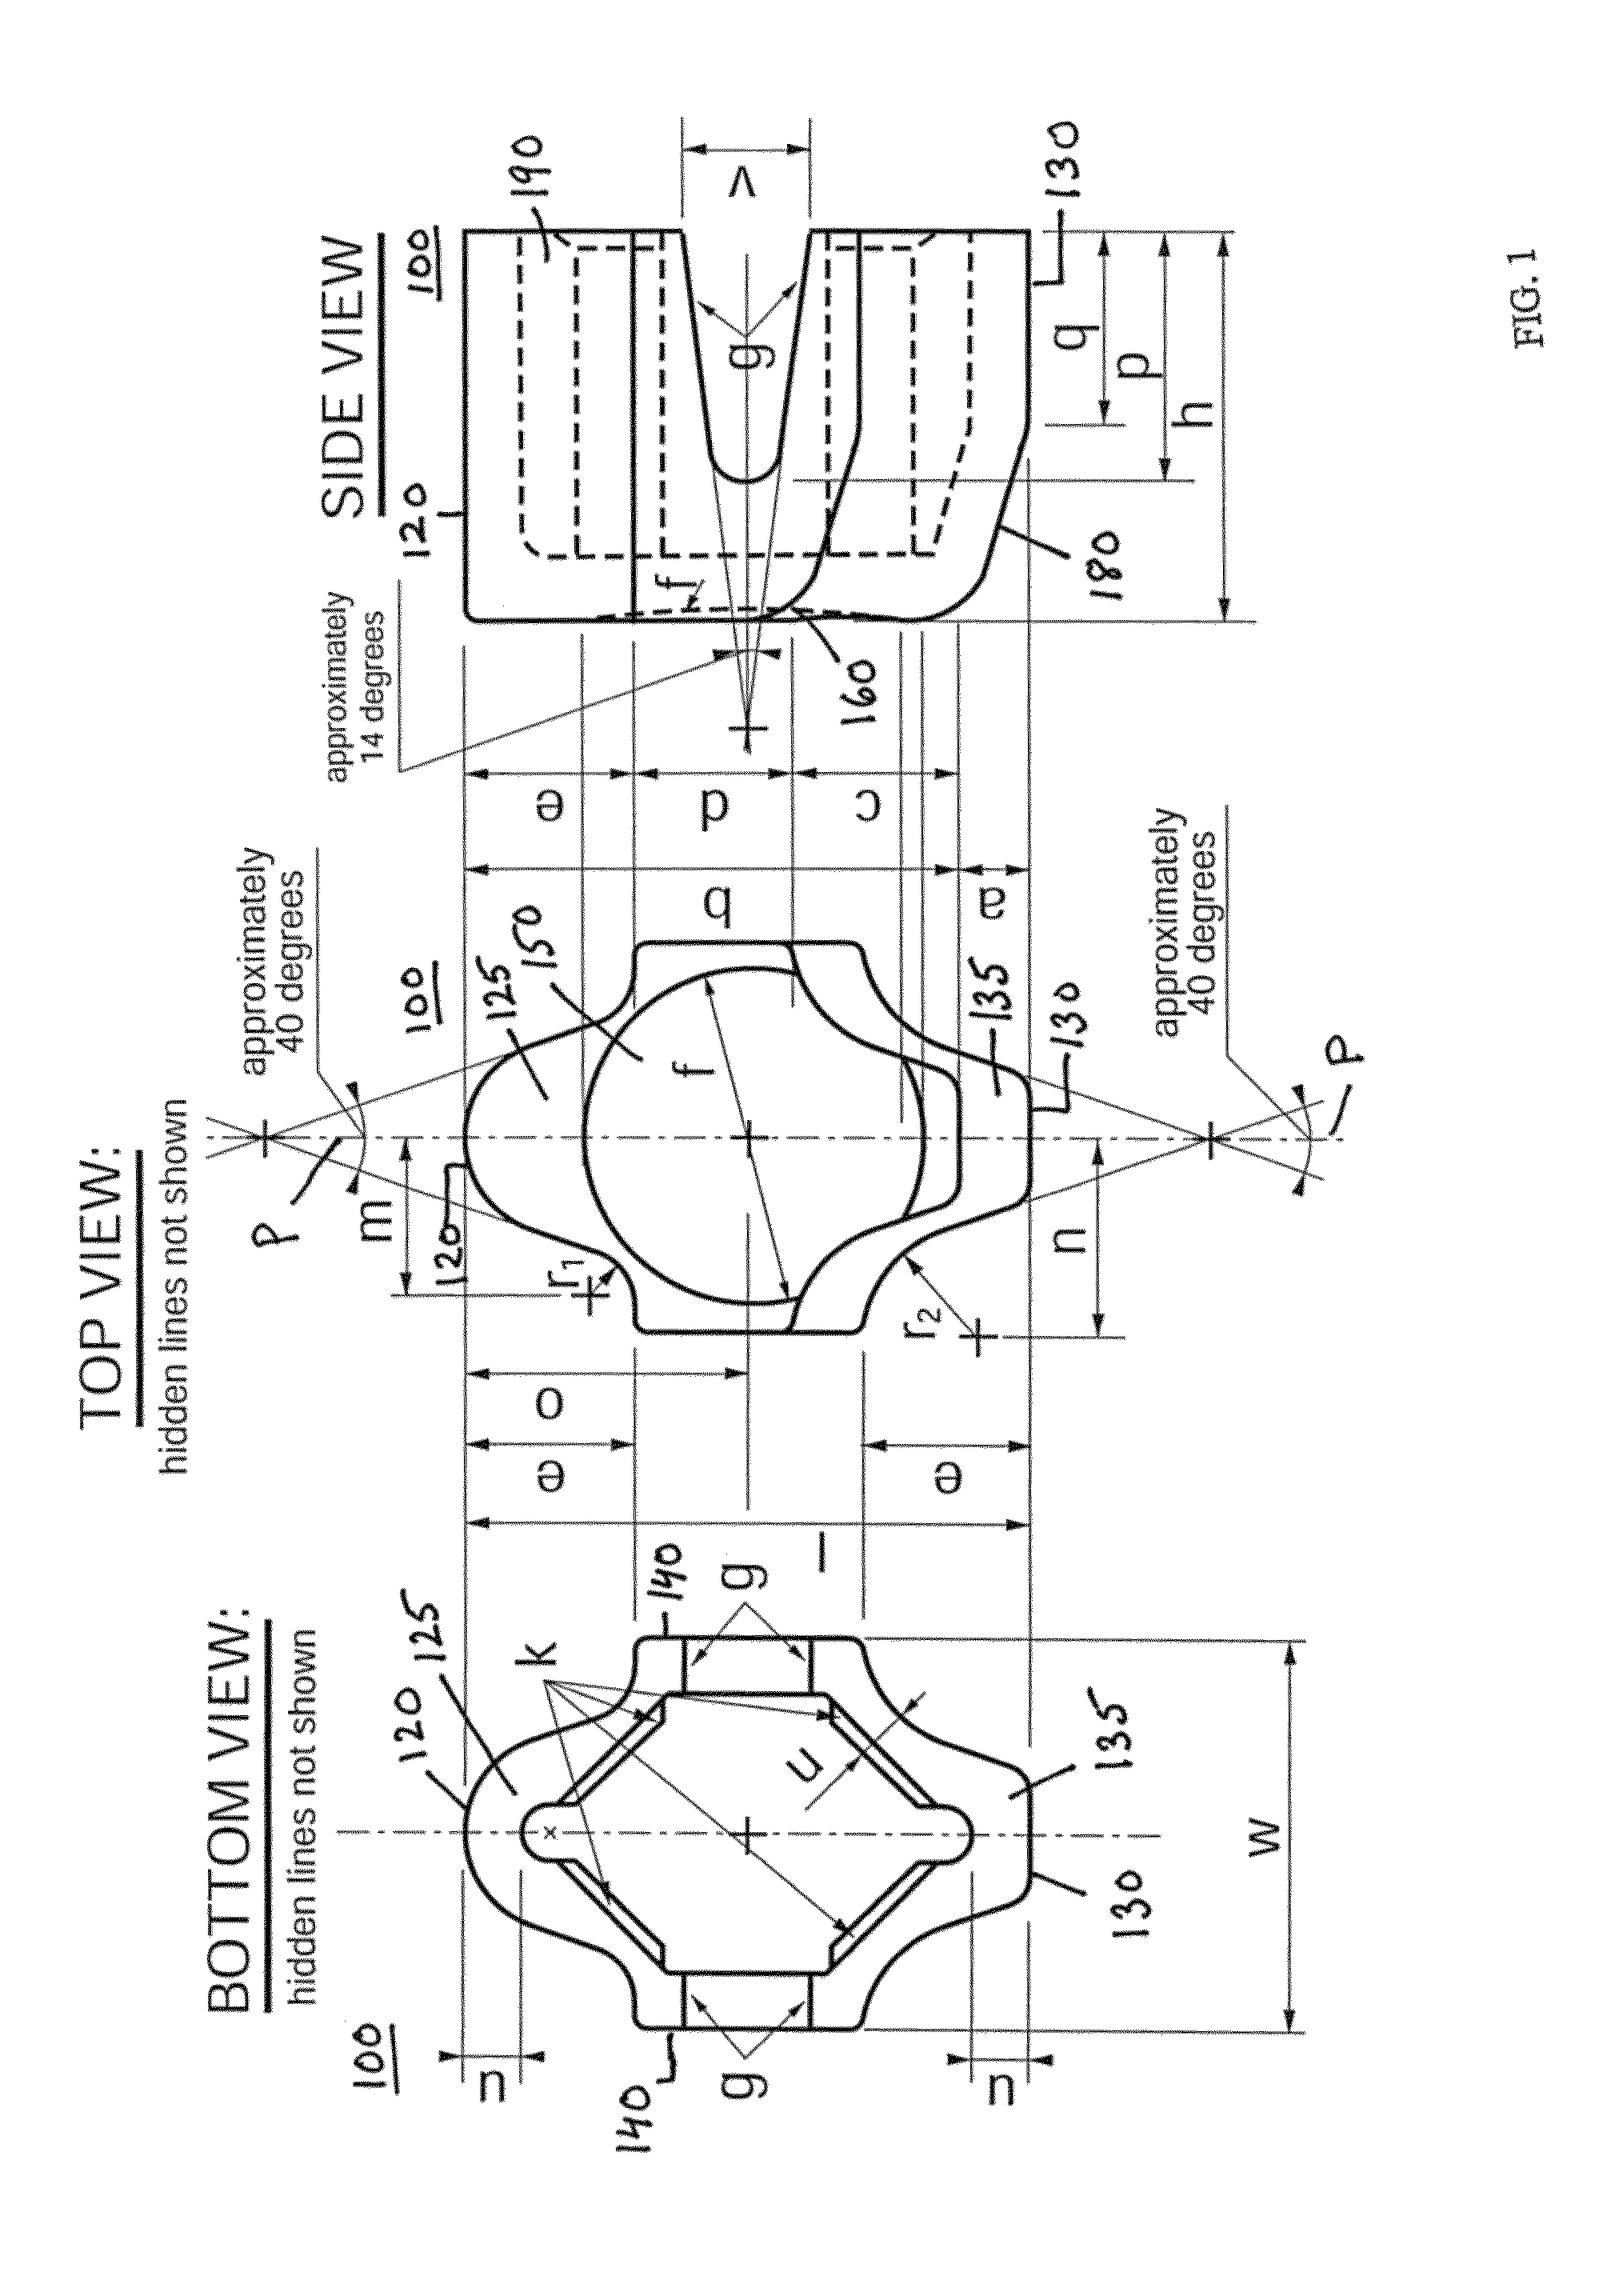 Music teaching device and method